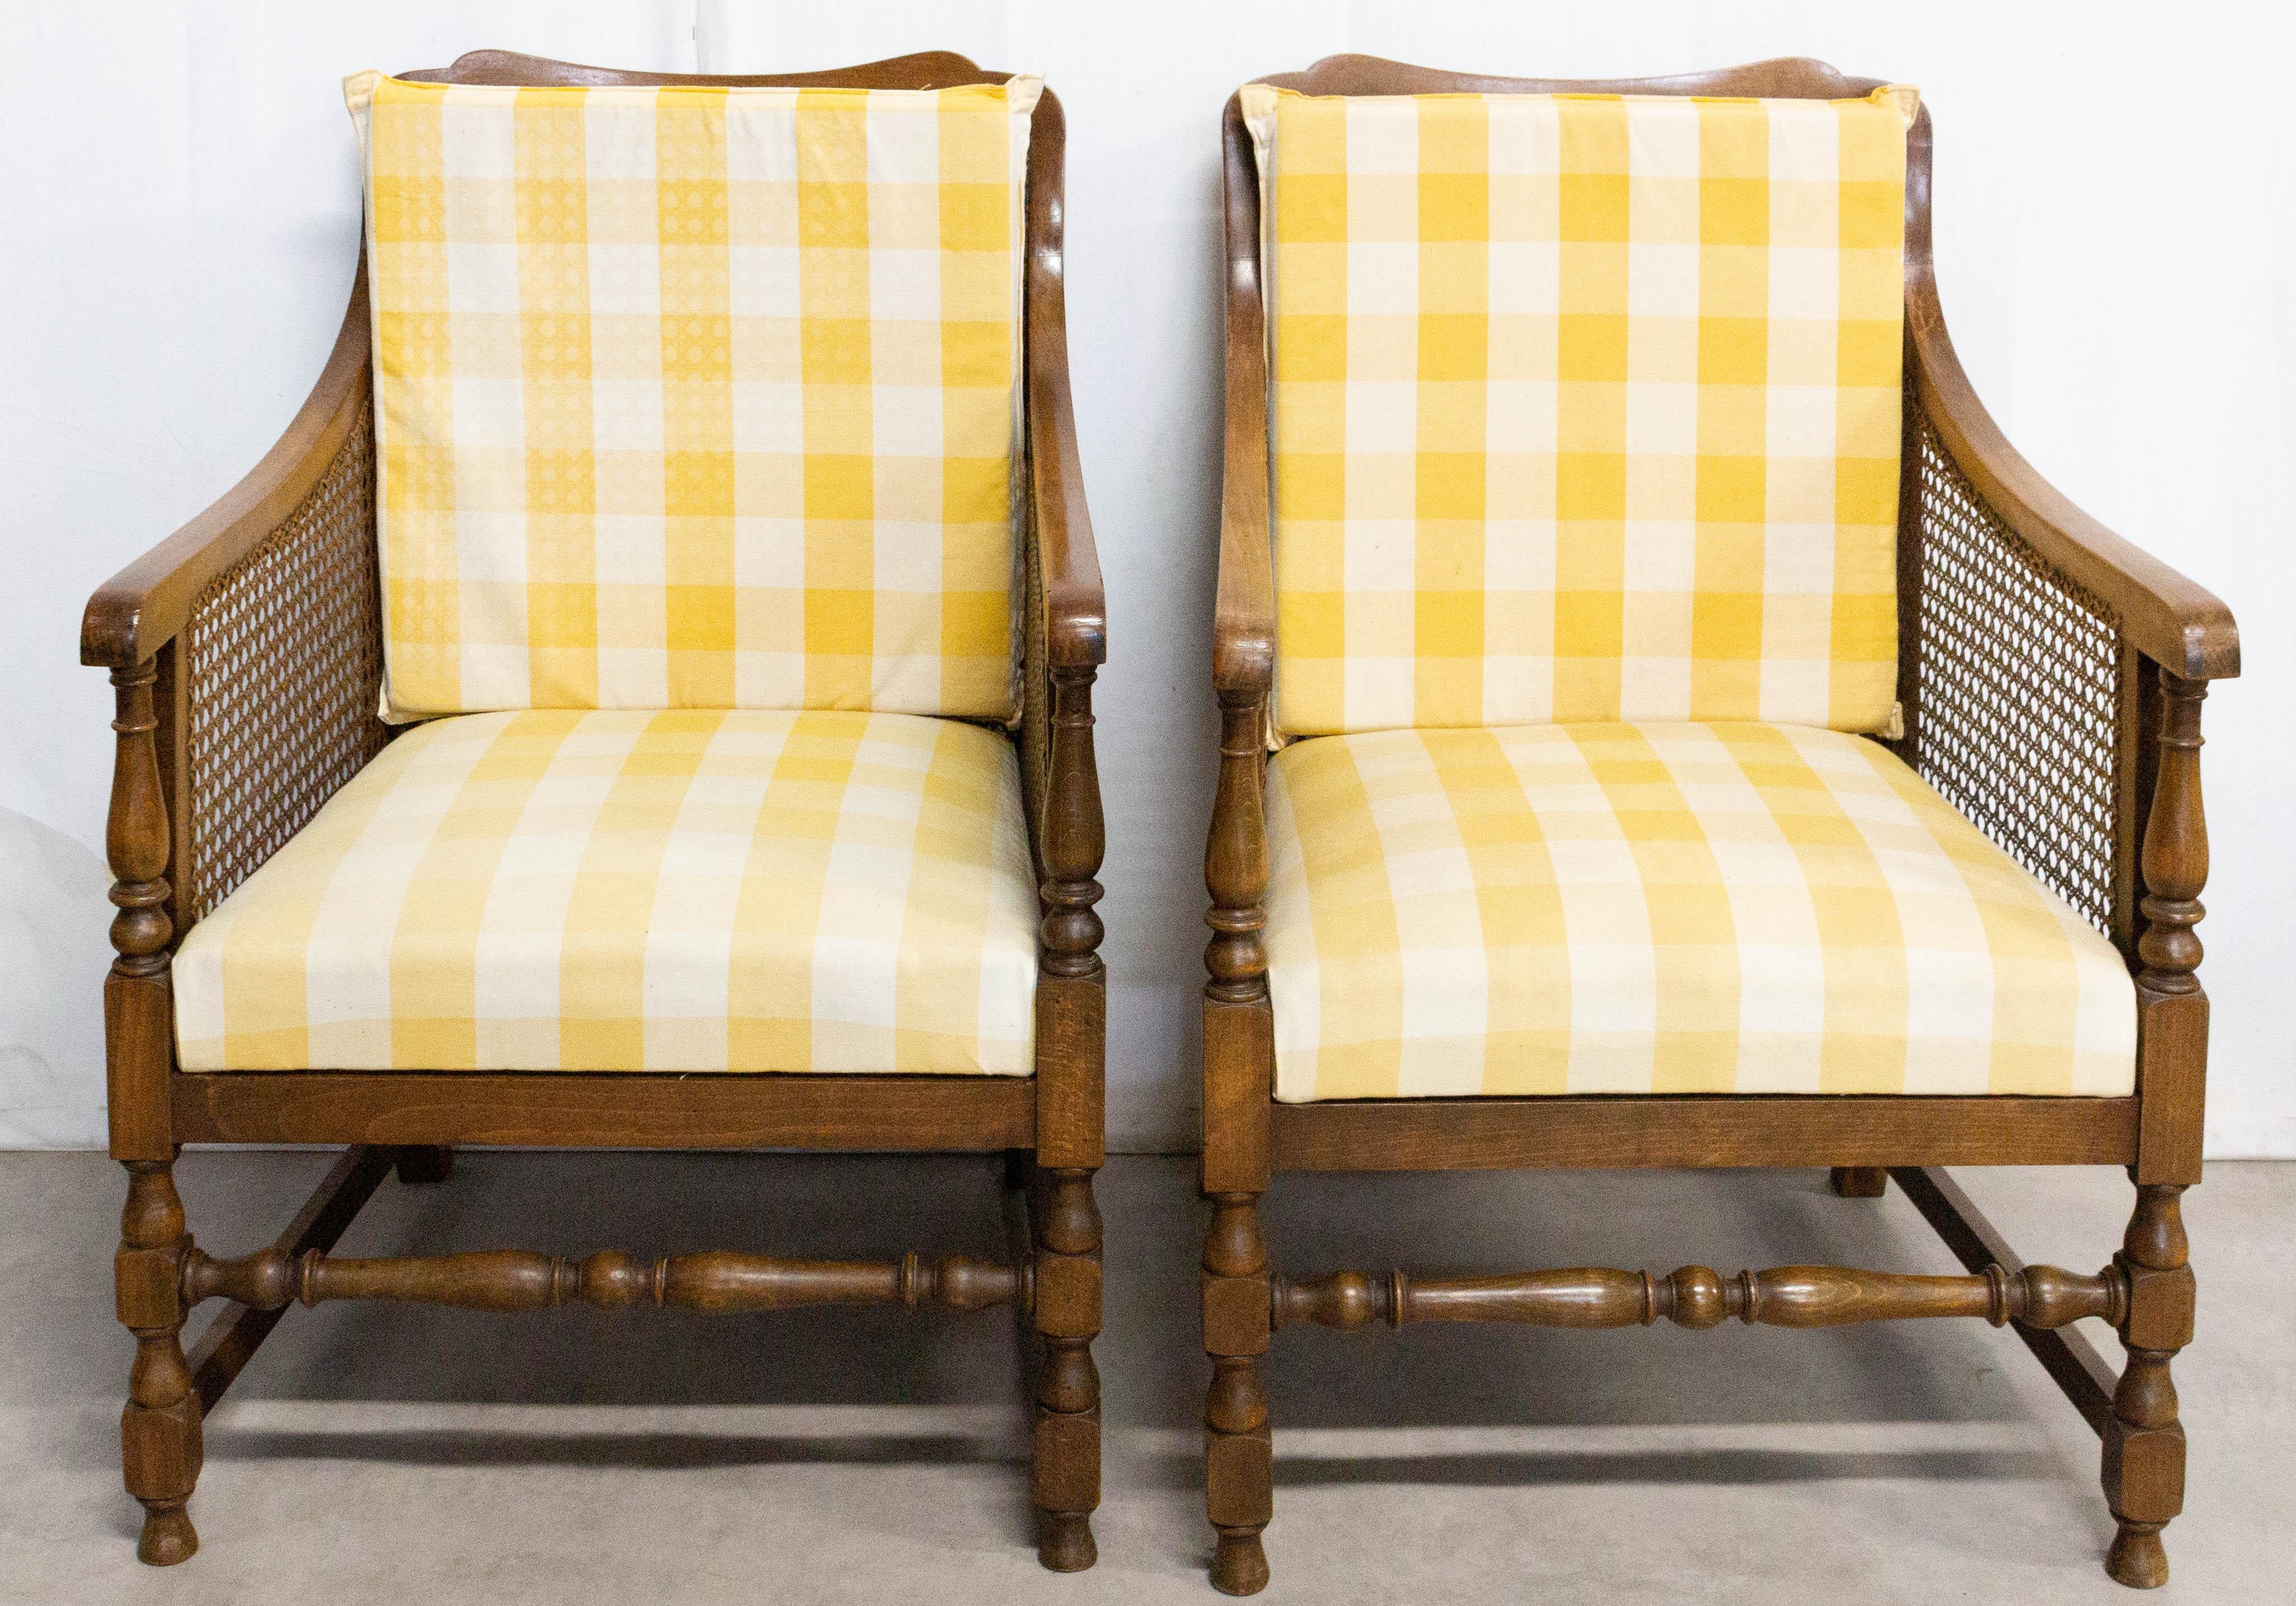 French pair of beech armchairs side or desk caned chairs, to be re-covered
circa 1920
Very good condition
The frames are sound and solid.

Shipping:
57/58/87cm 11.3 kg each.
 